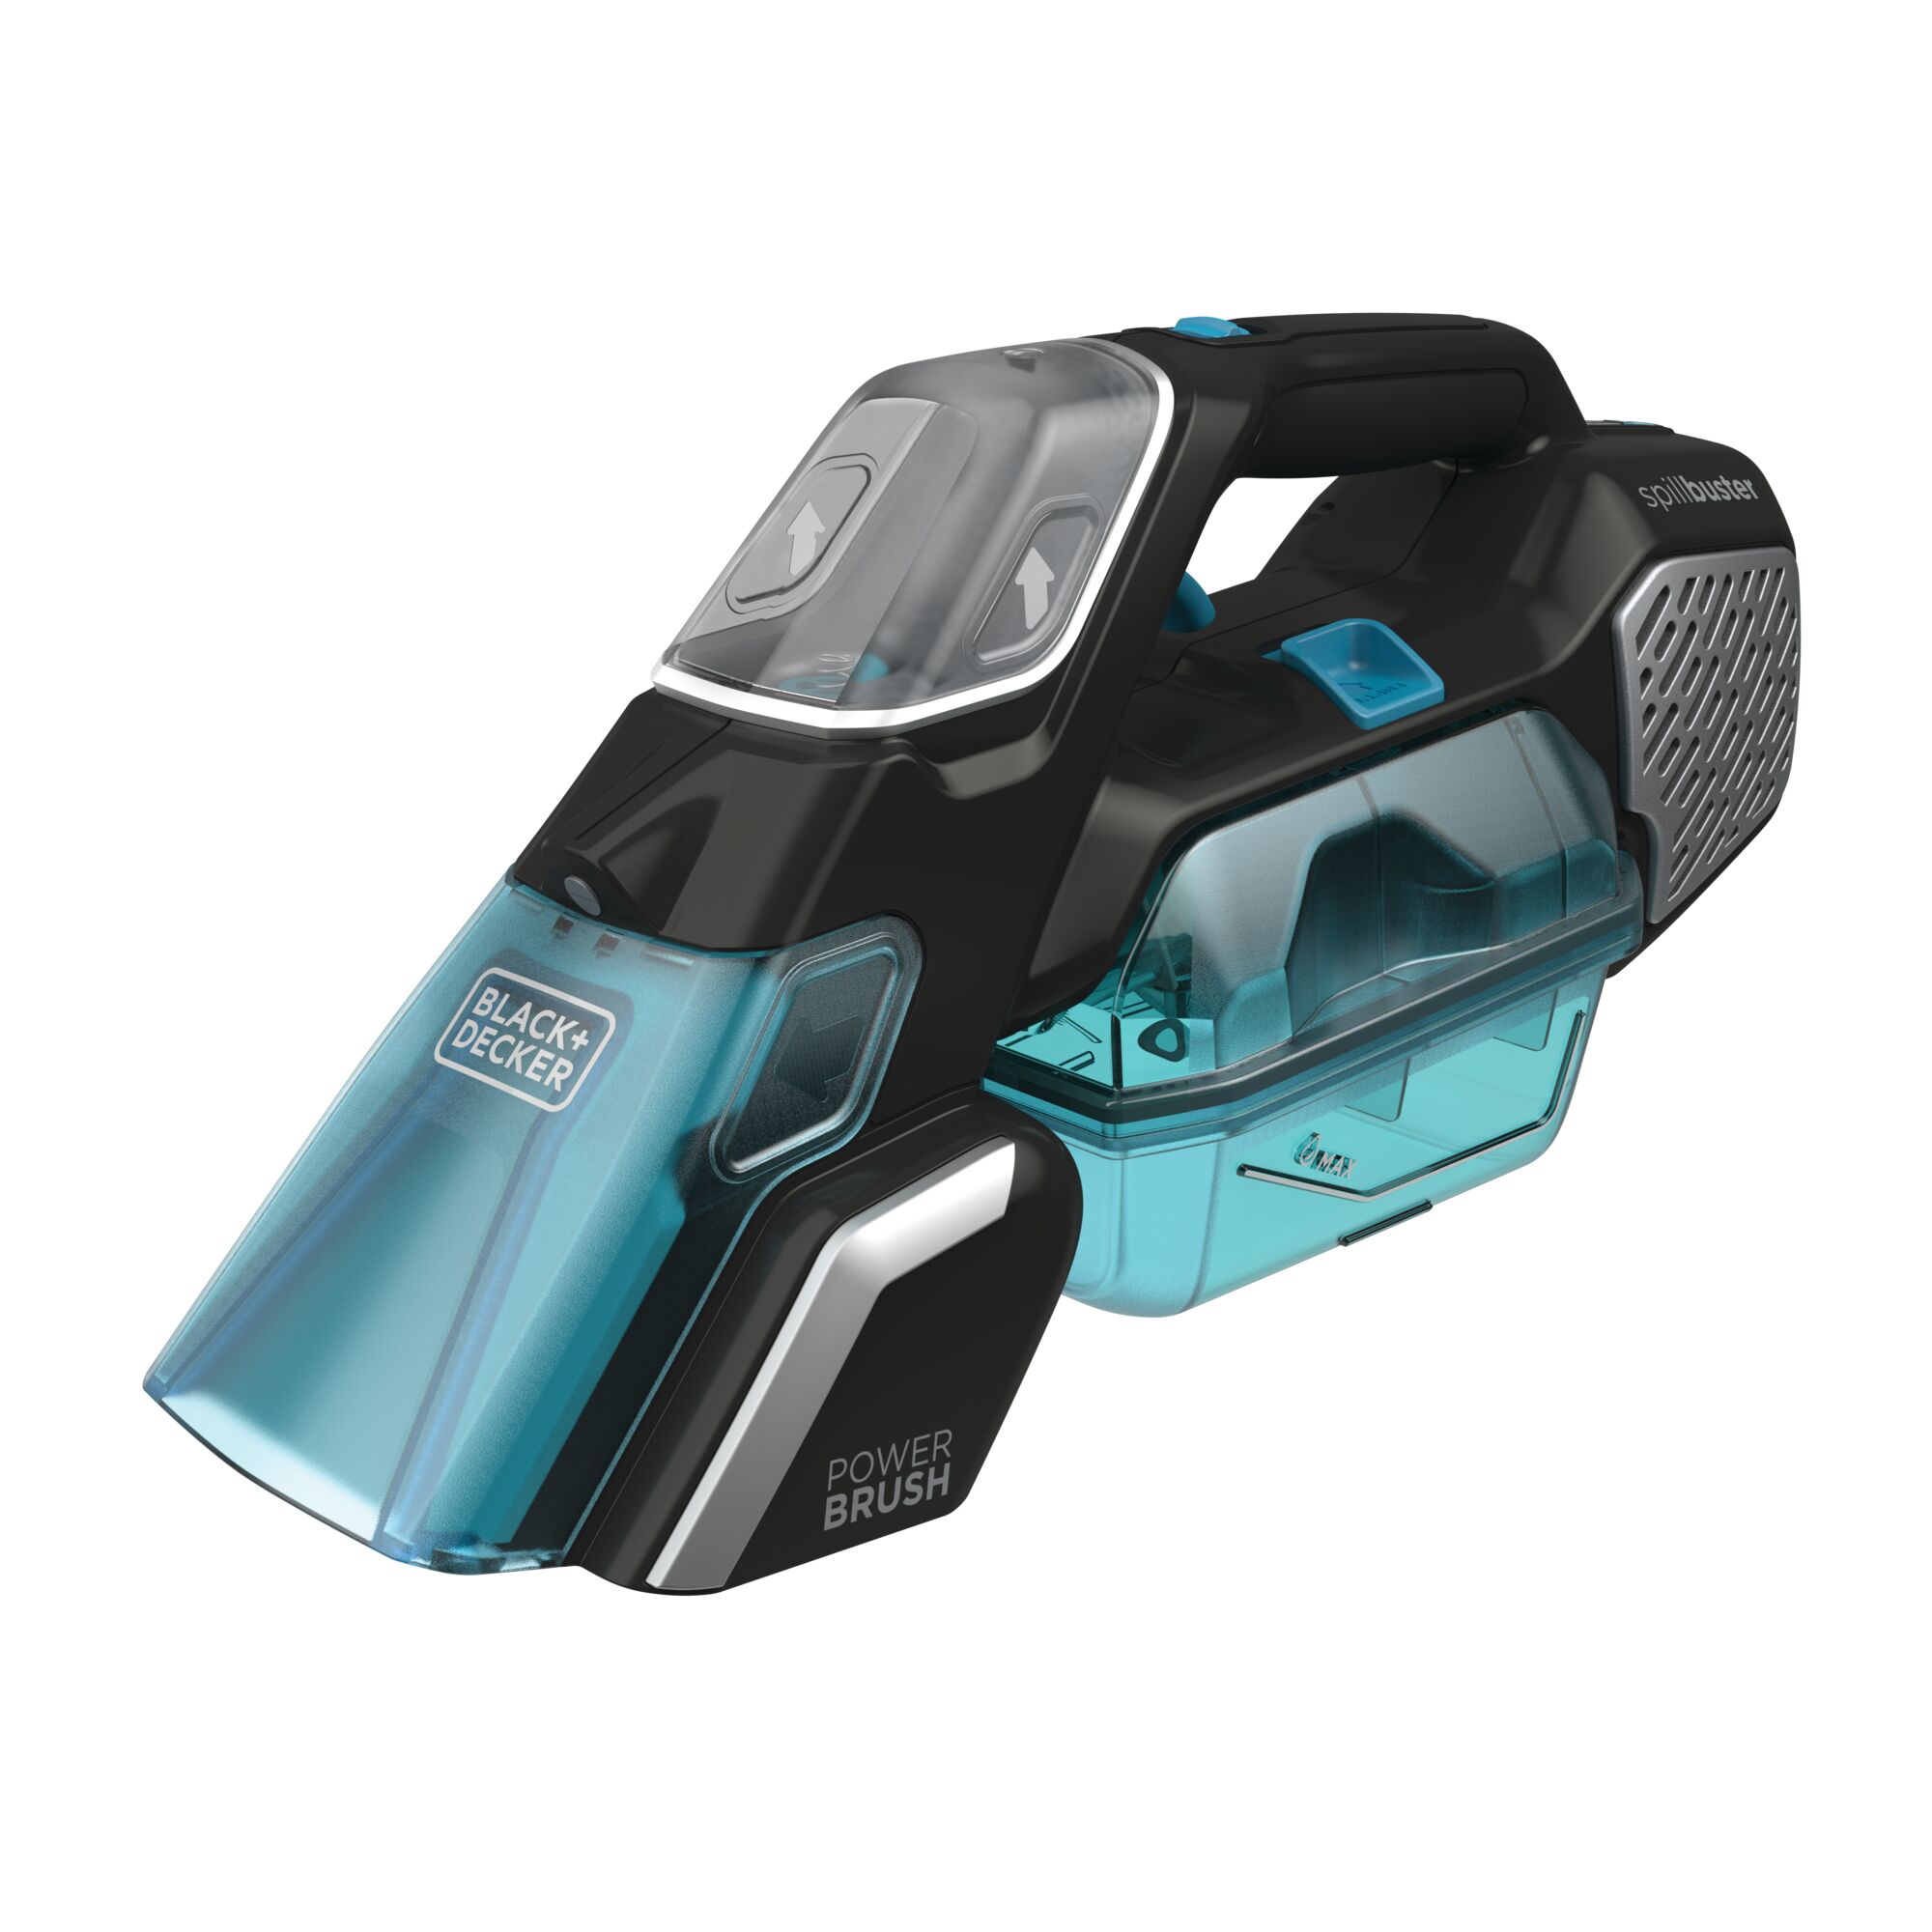 Profile of spillbuster cordless spill plus spot cleaner with powered scrub brush.